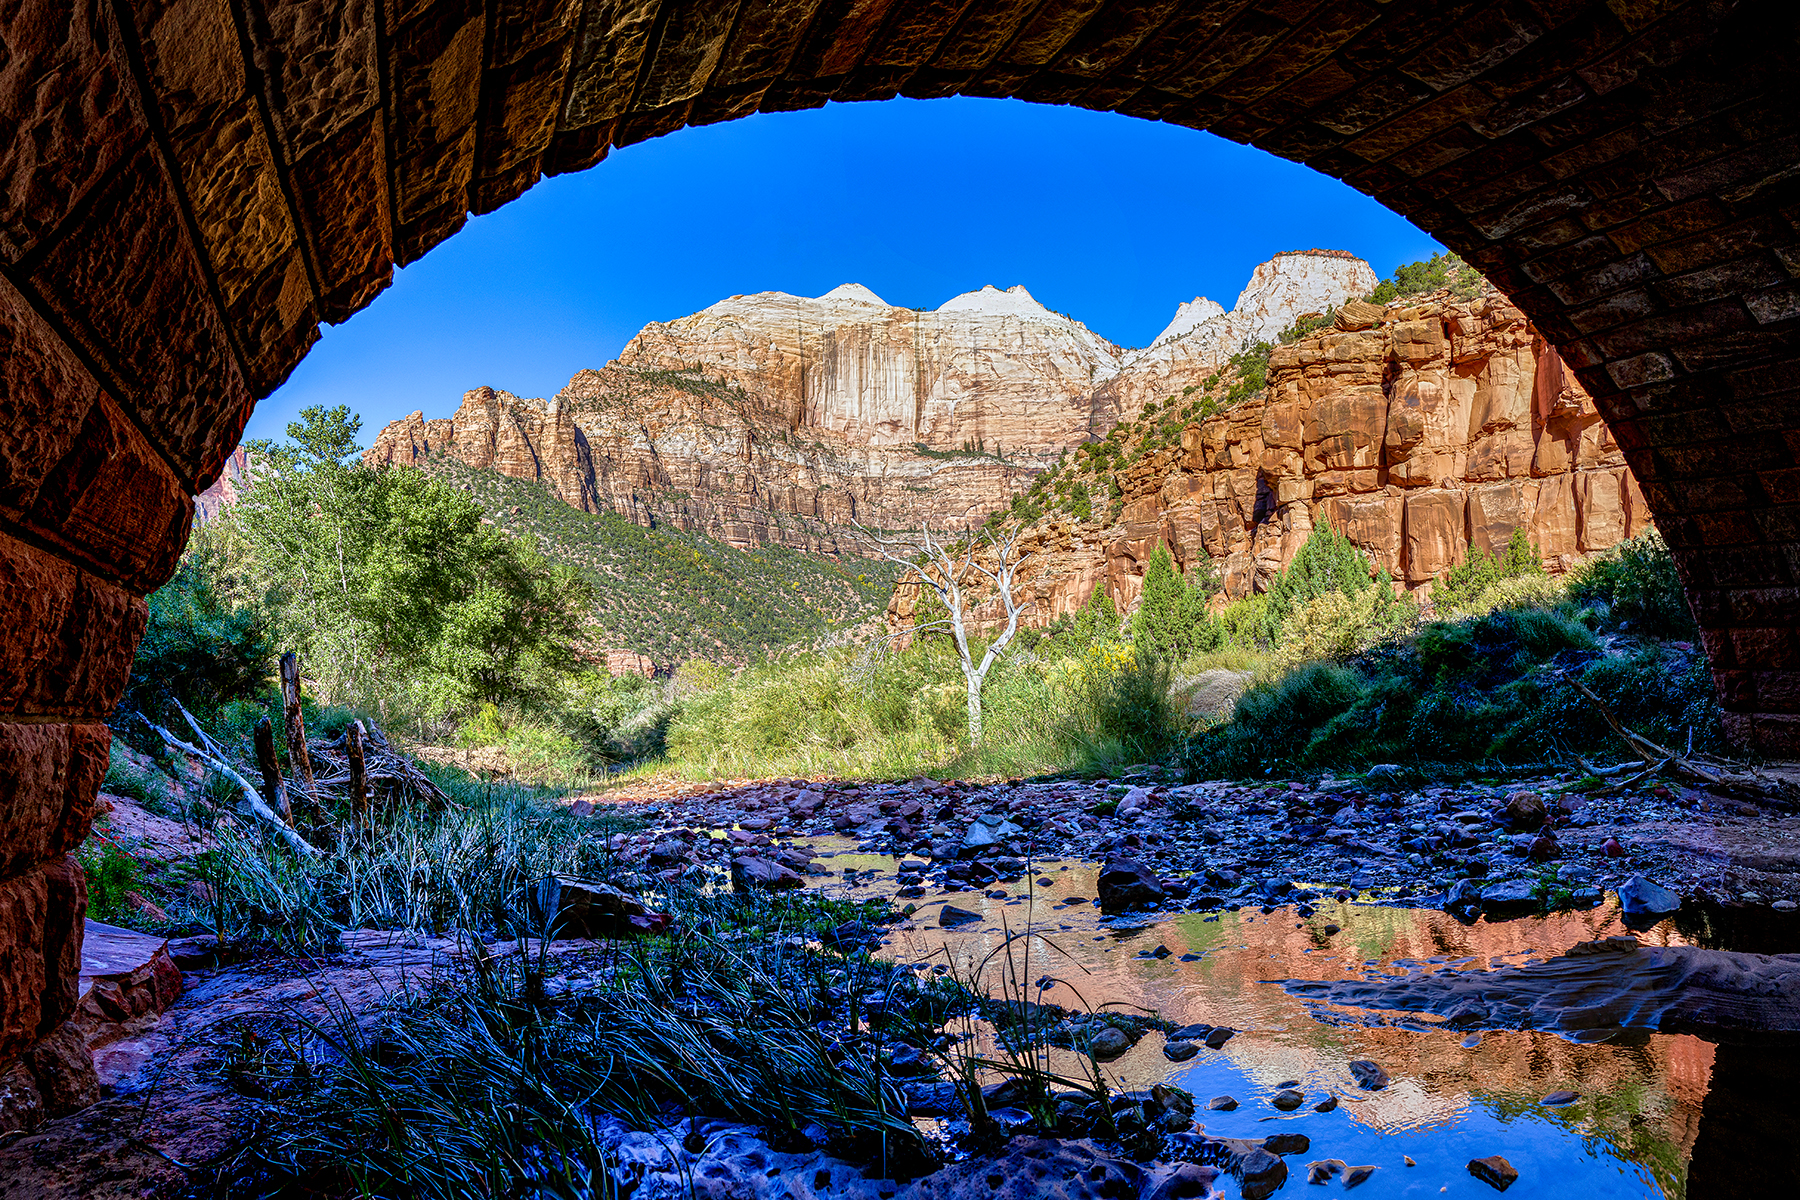 ZION DOWN UNDER - Most people don't see this view because you have to hike down under an overpass to find it. This day the light was good and the reflection was a bonus.